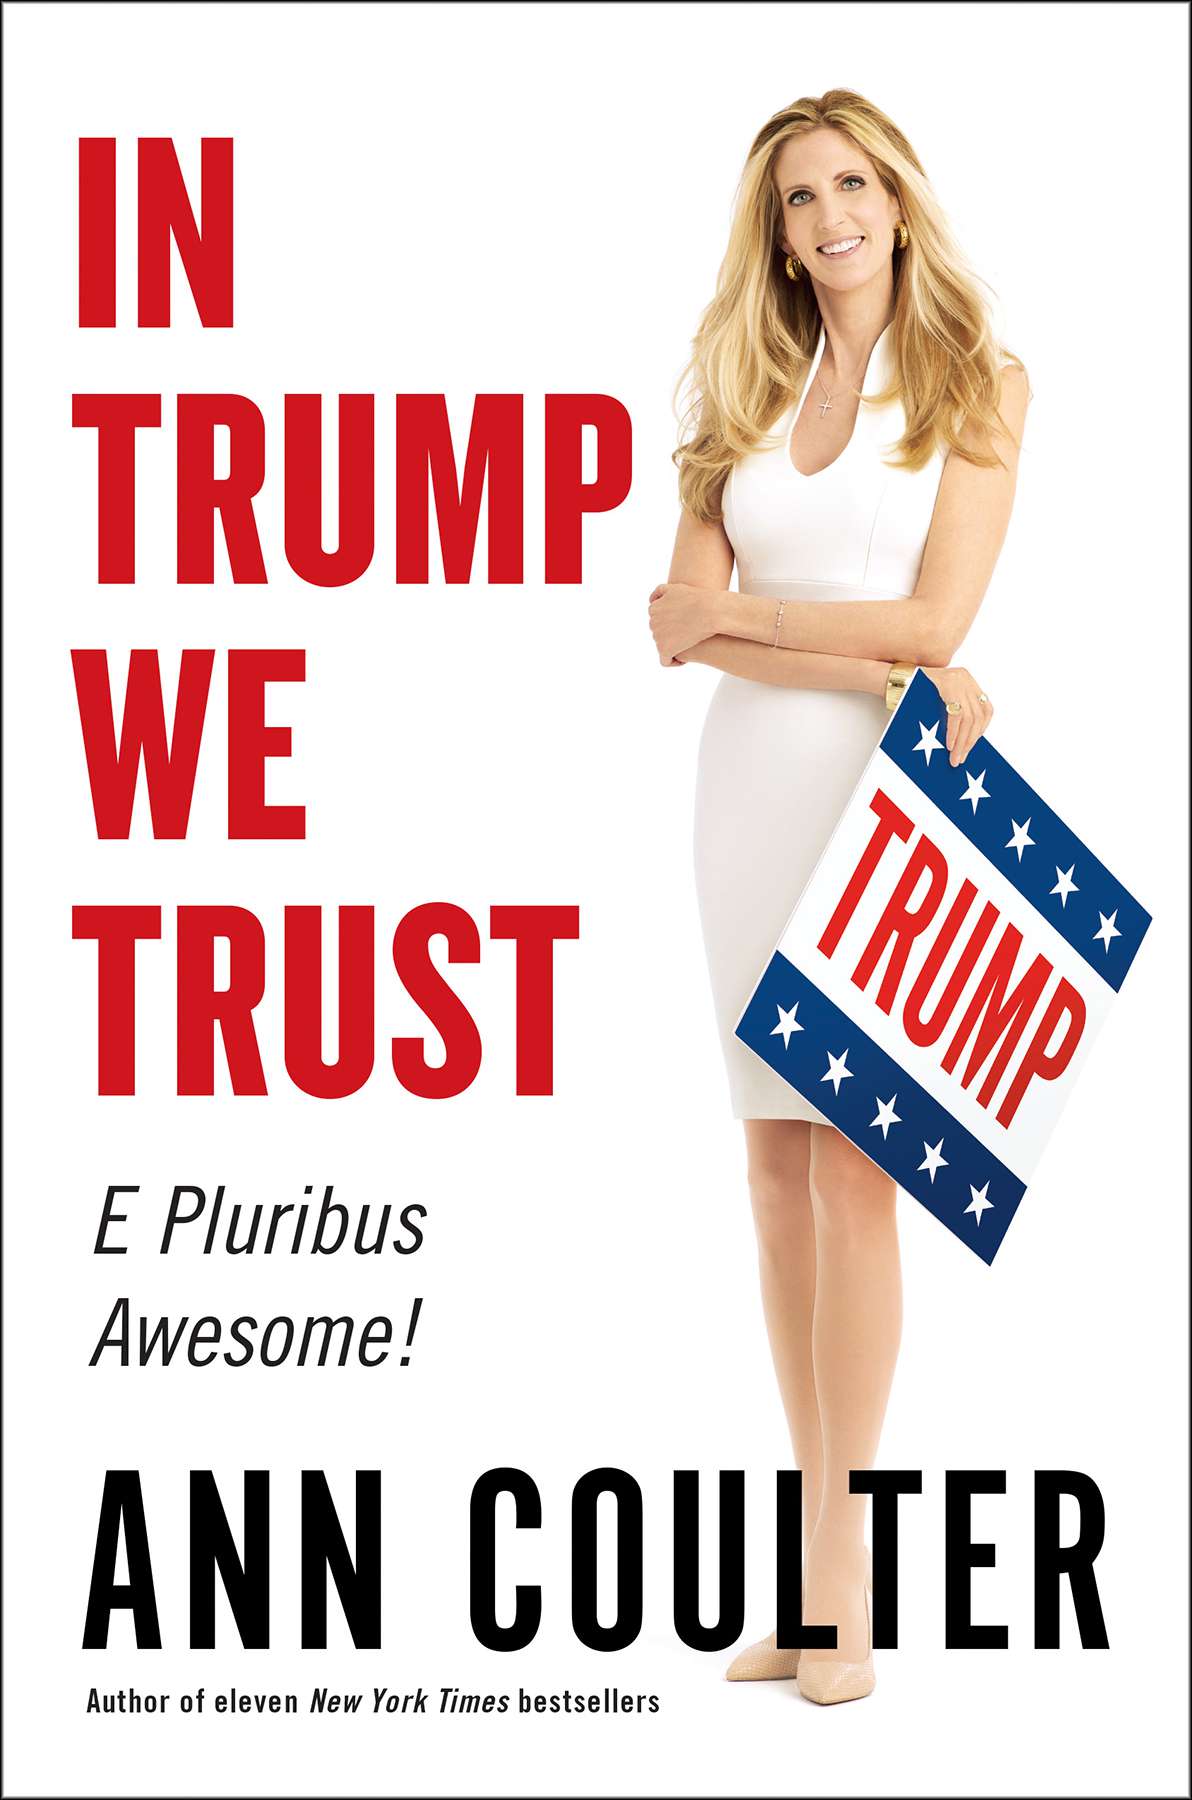 In Trump We Trust: E Pluribus Awesome! (8/23/2016)by Ann Coulter